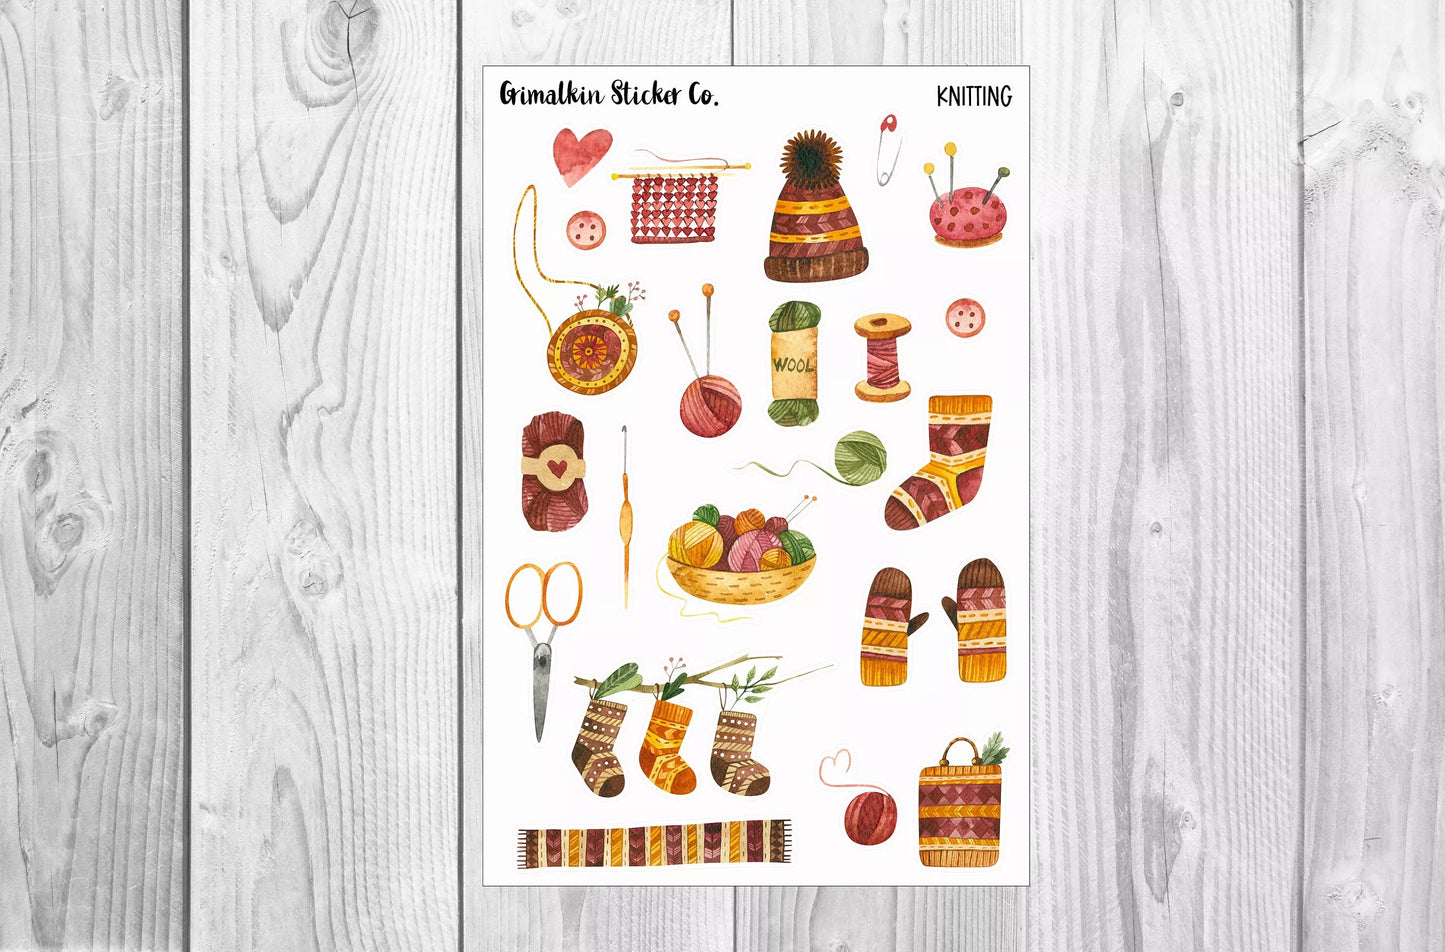 Vintage Knitting Large Sticker Sheet for Journals, Scrapbooks or Planners, Decorative Stickers, Decorative Stickers, The Crafty Grimalkin - A Cross Stitch Store